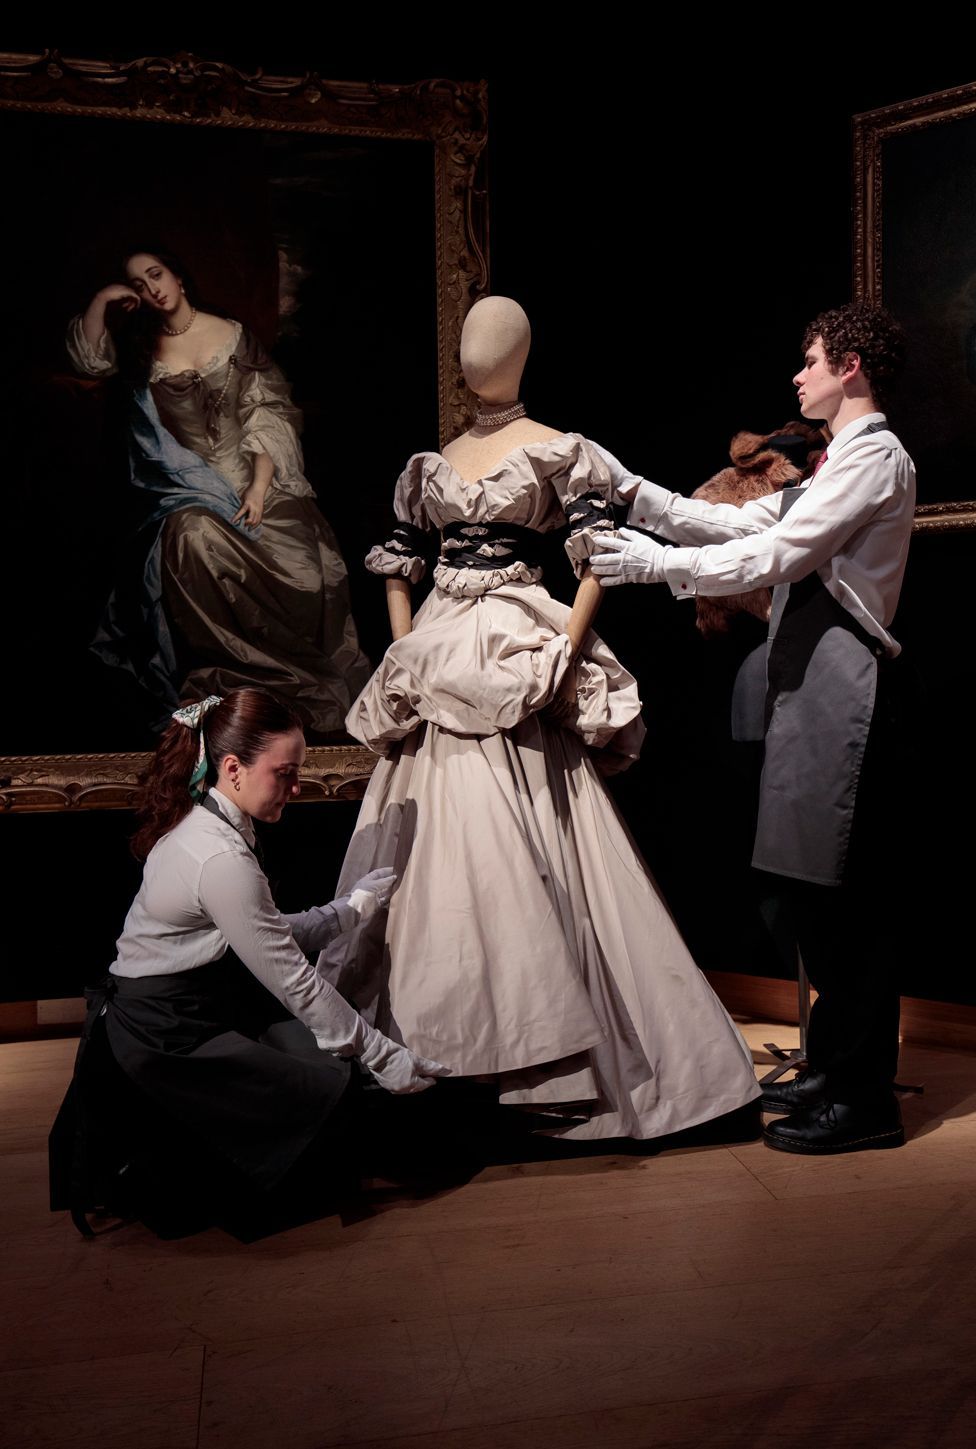 Technicians adjust a dress from Vivienne Westwood’s collection at Christie's auction house in London